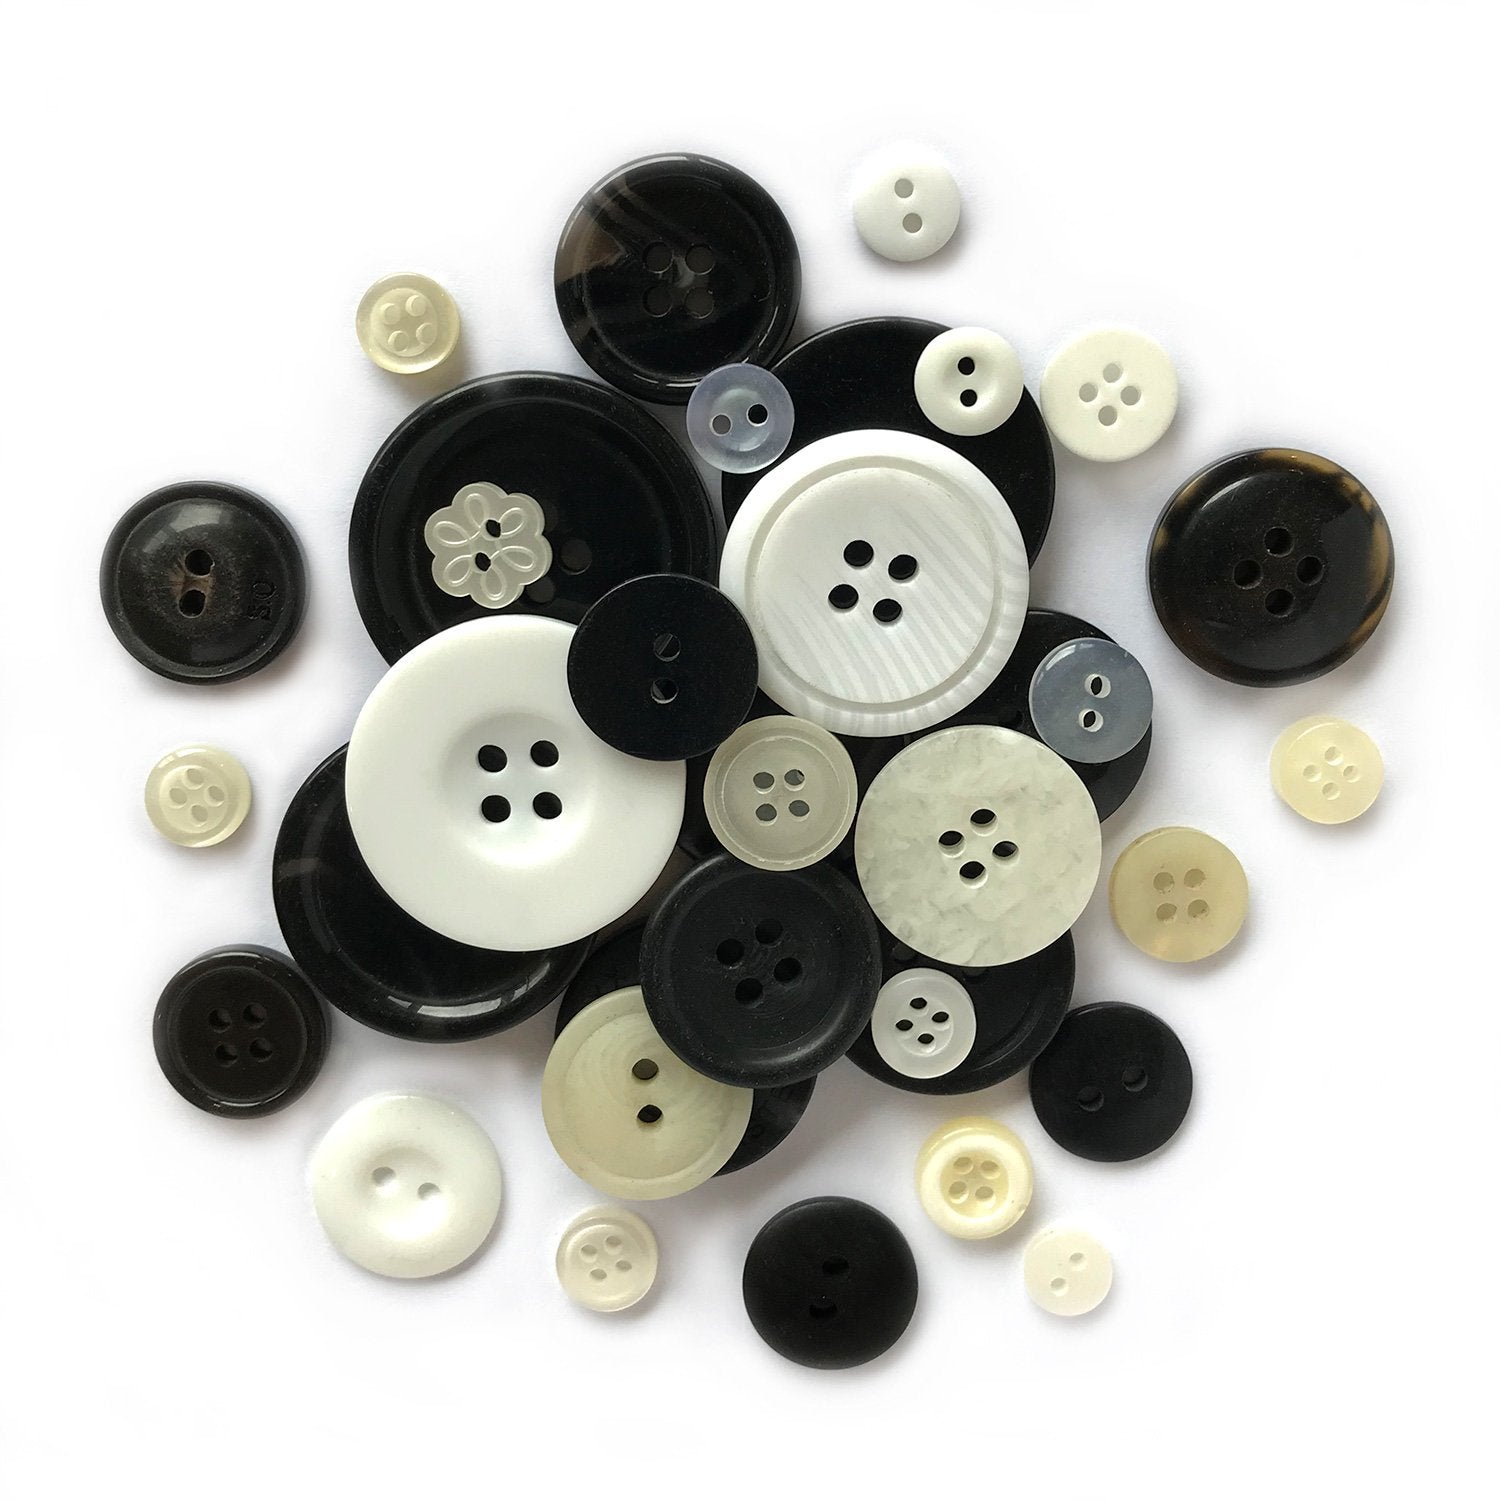 Tuxedo - BB59 - Buttons Galore and More